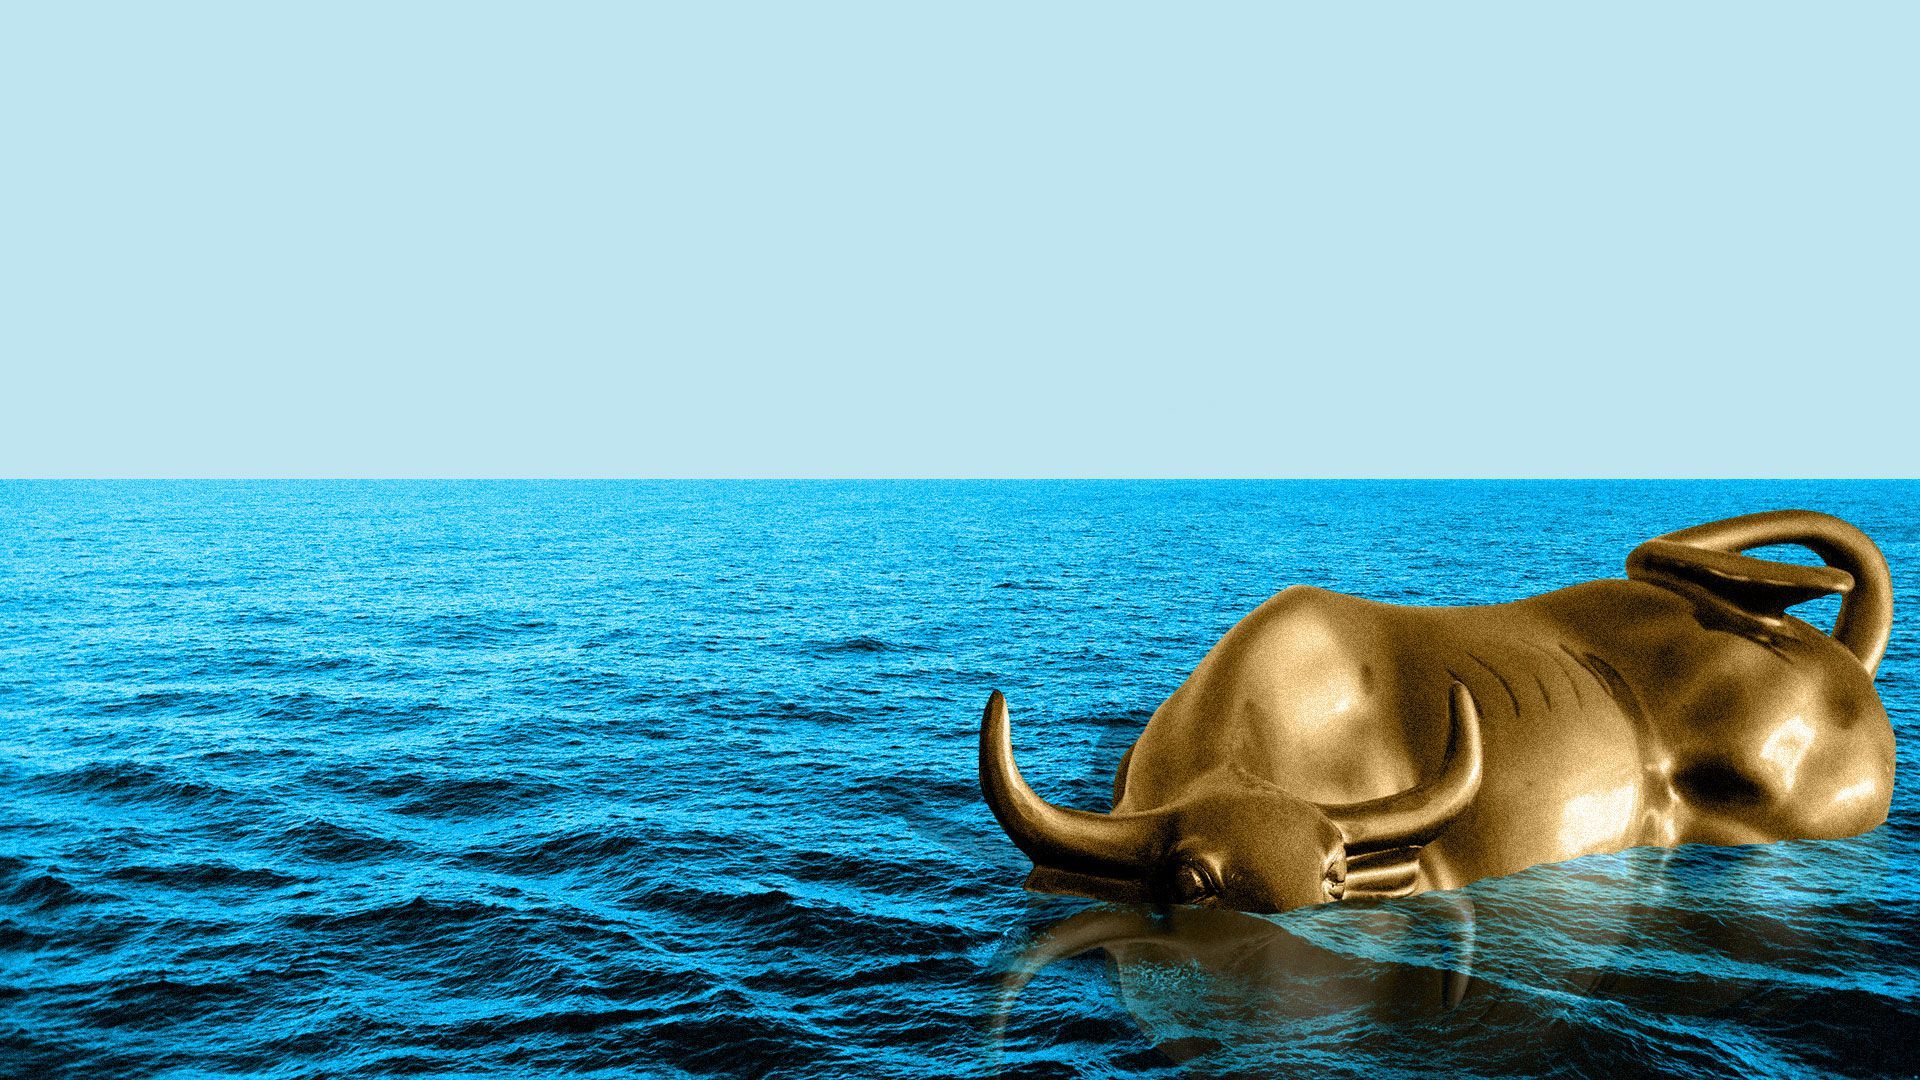 Illustration of the Wall Street bull under blue water.  